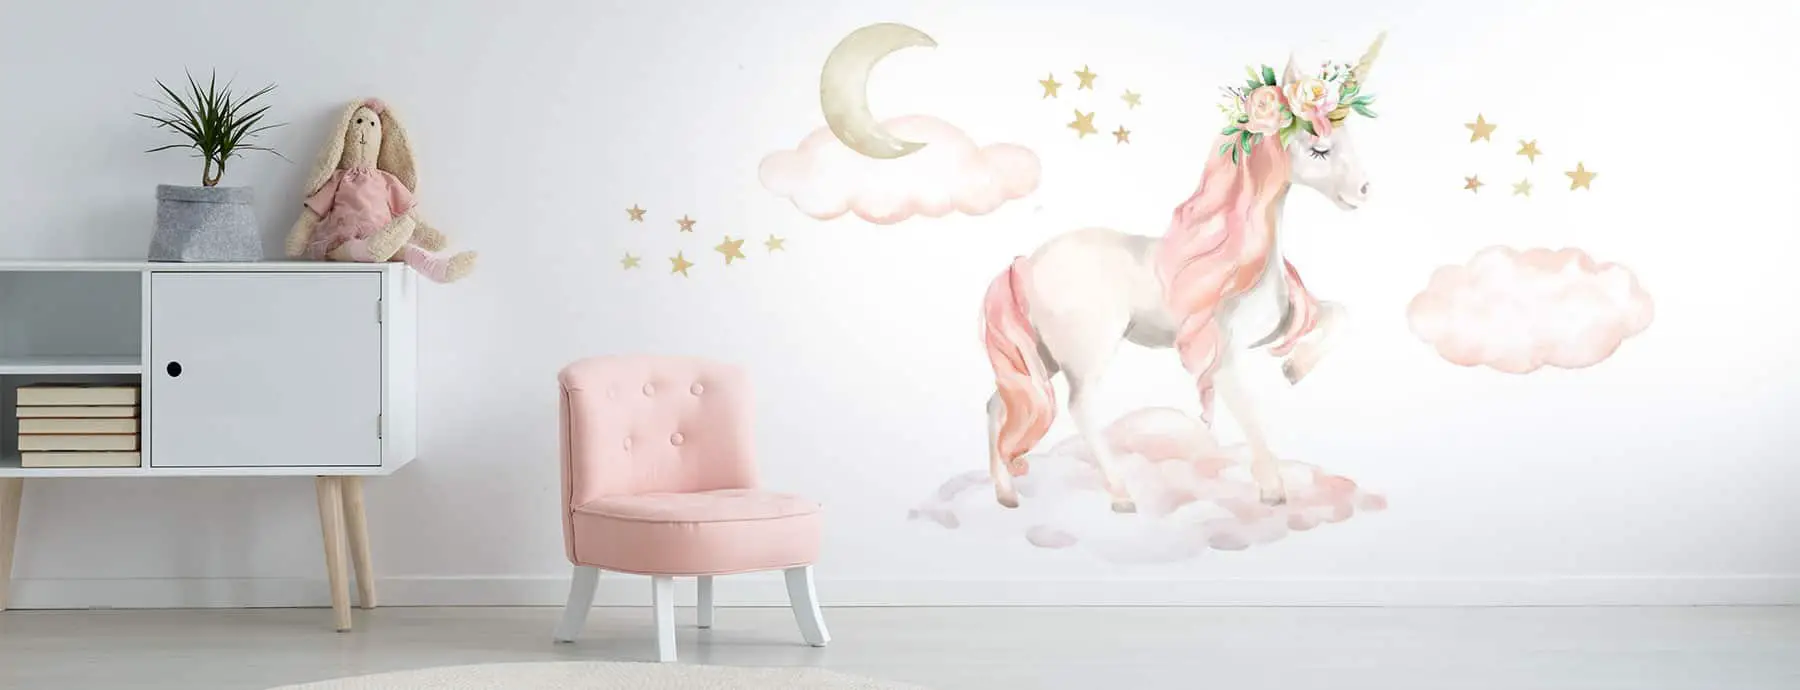 Gusuhome Unicorn Wall Stickers for Girls Bedroom Galaxy Unicorn Wall Decal Stickers for Kids Removable Wallpaper Decals Art for Children Bedrooms Nursery Christmas Birthday Party Decoration 